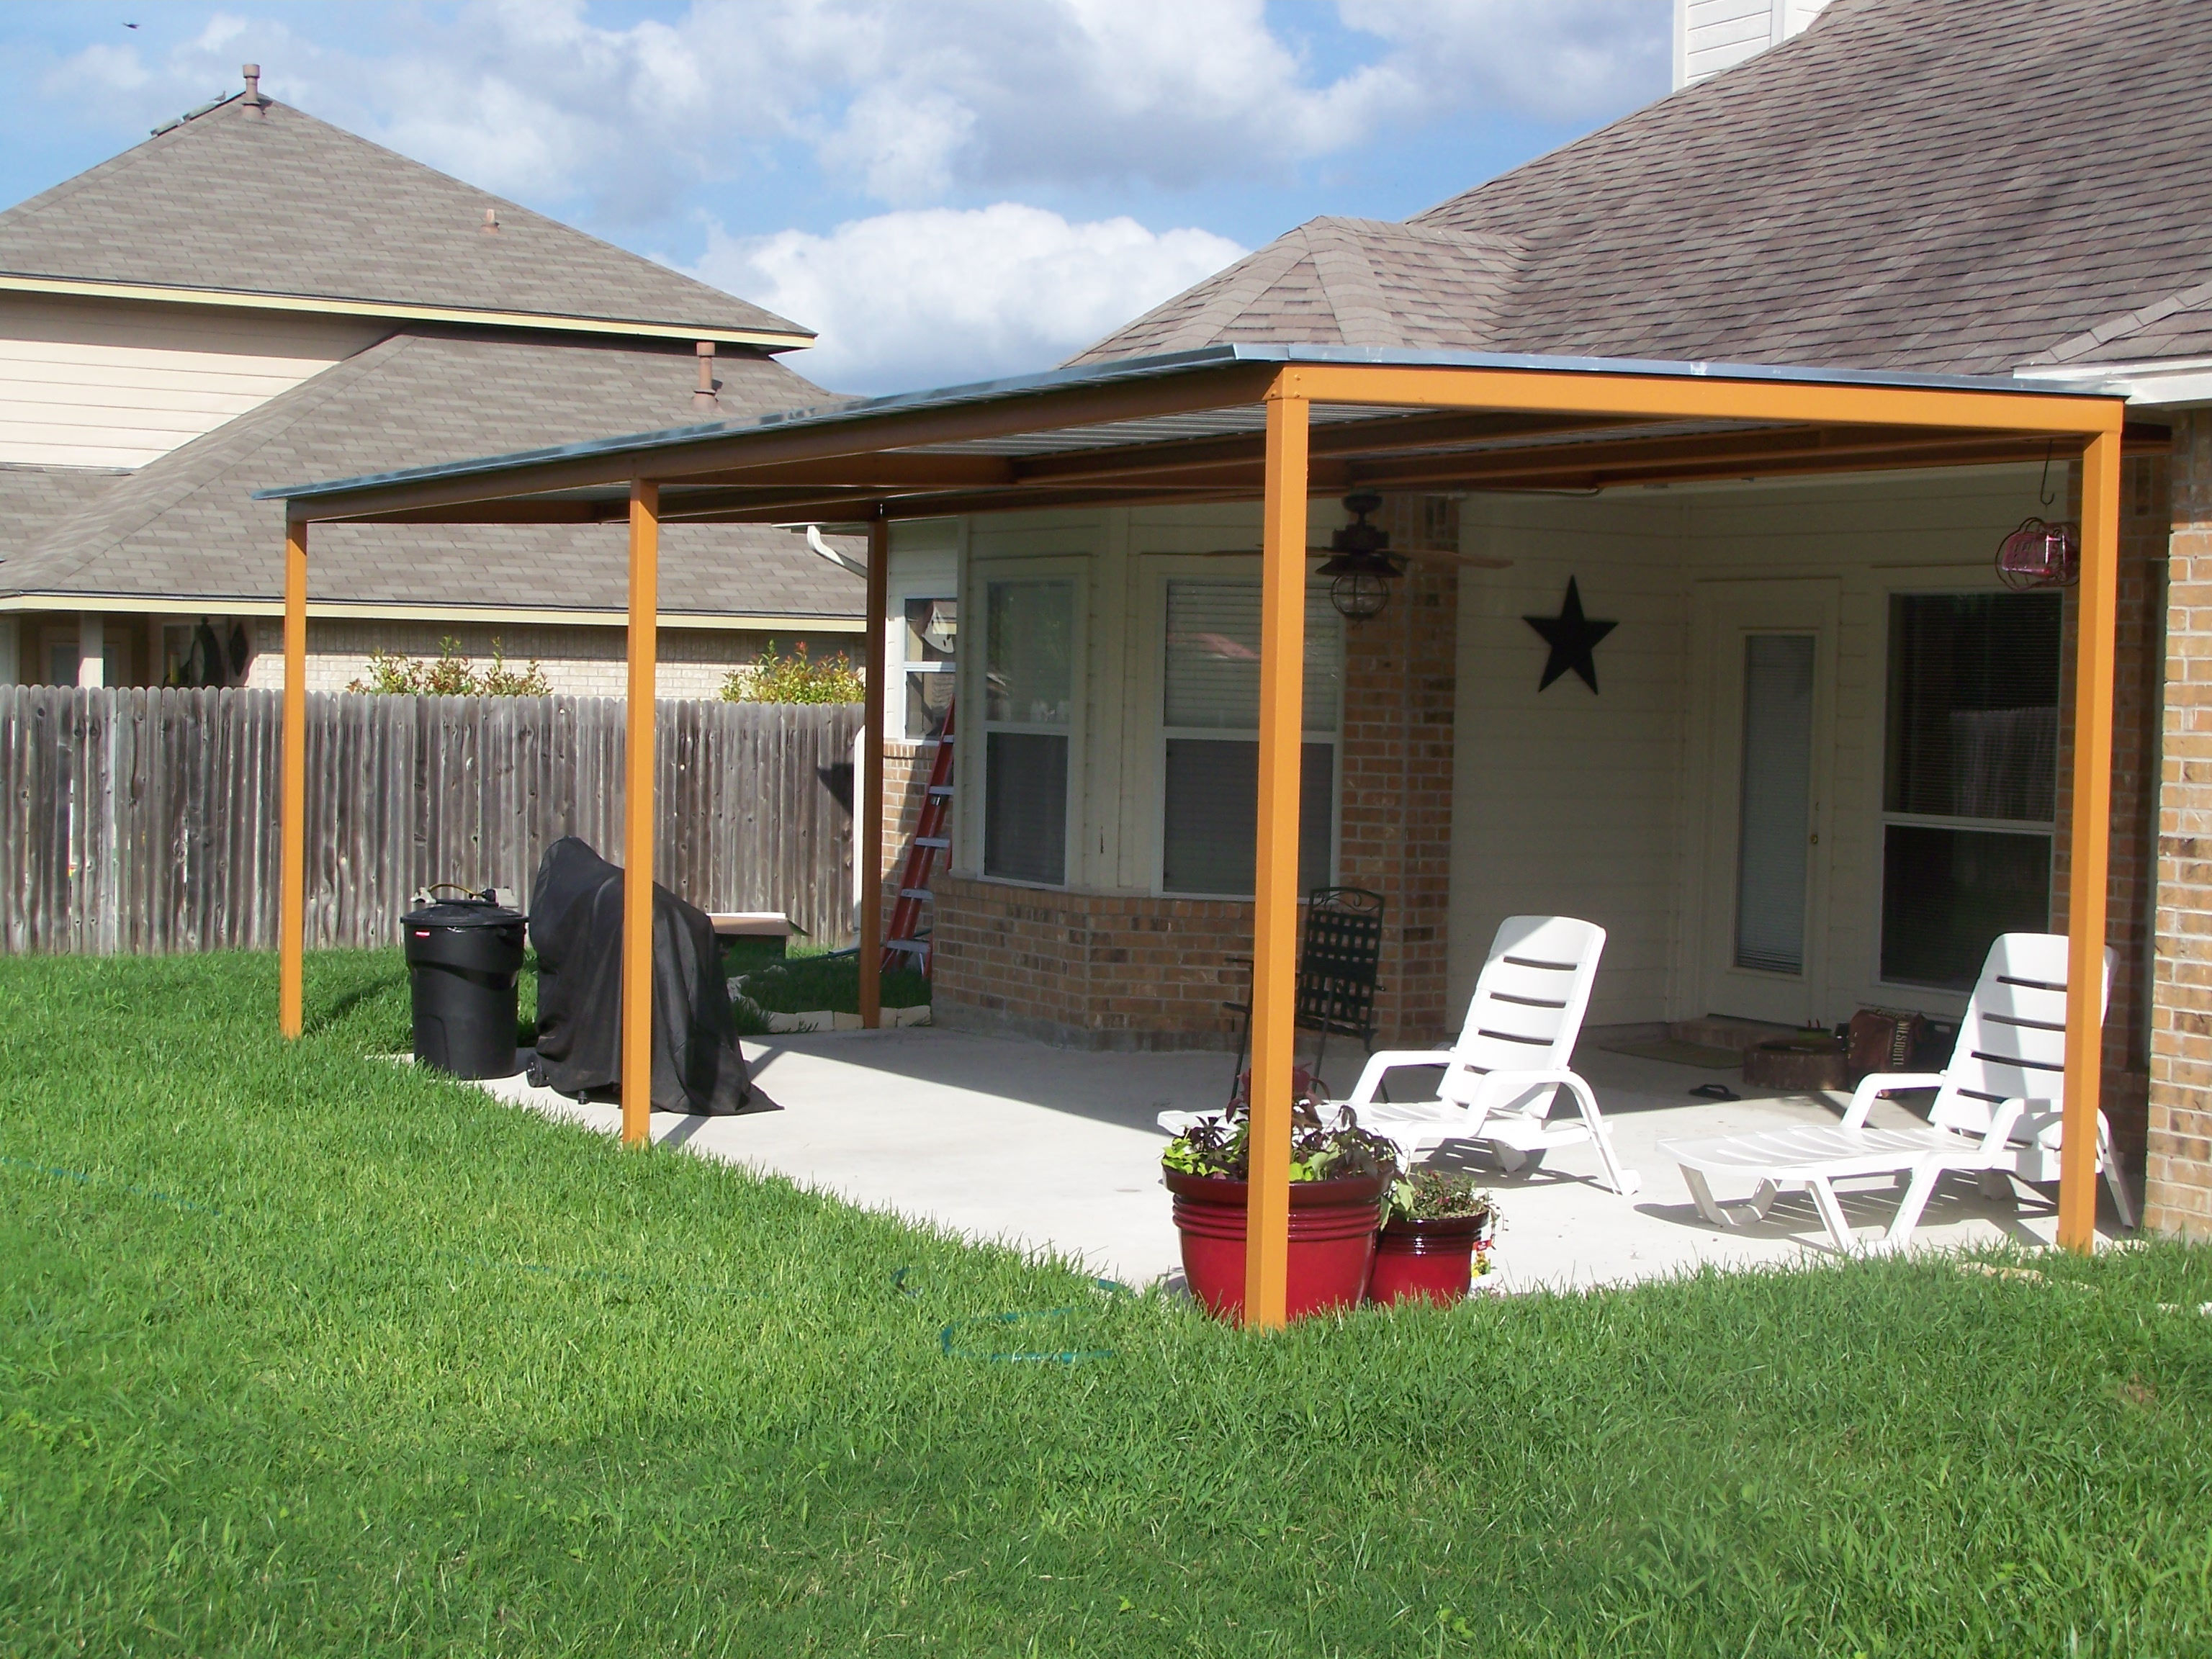 Aluminum Patio Cover Manufacturers Flat Panel Covers Small Carports within size 3072 X 2304